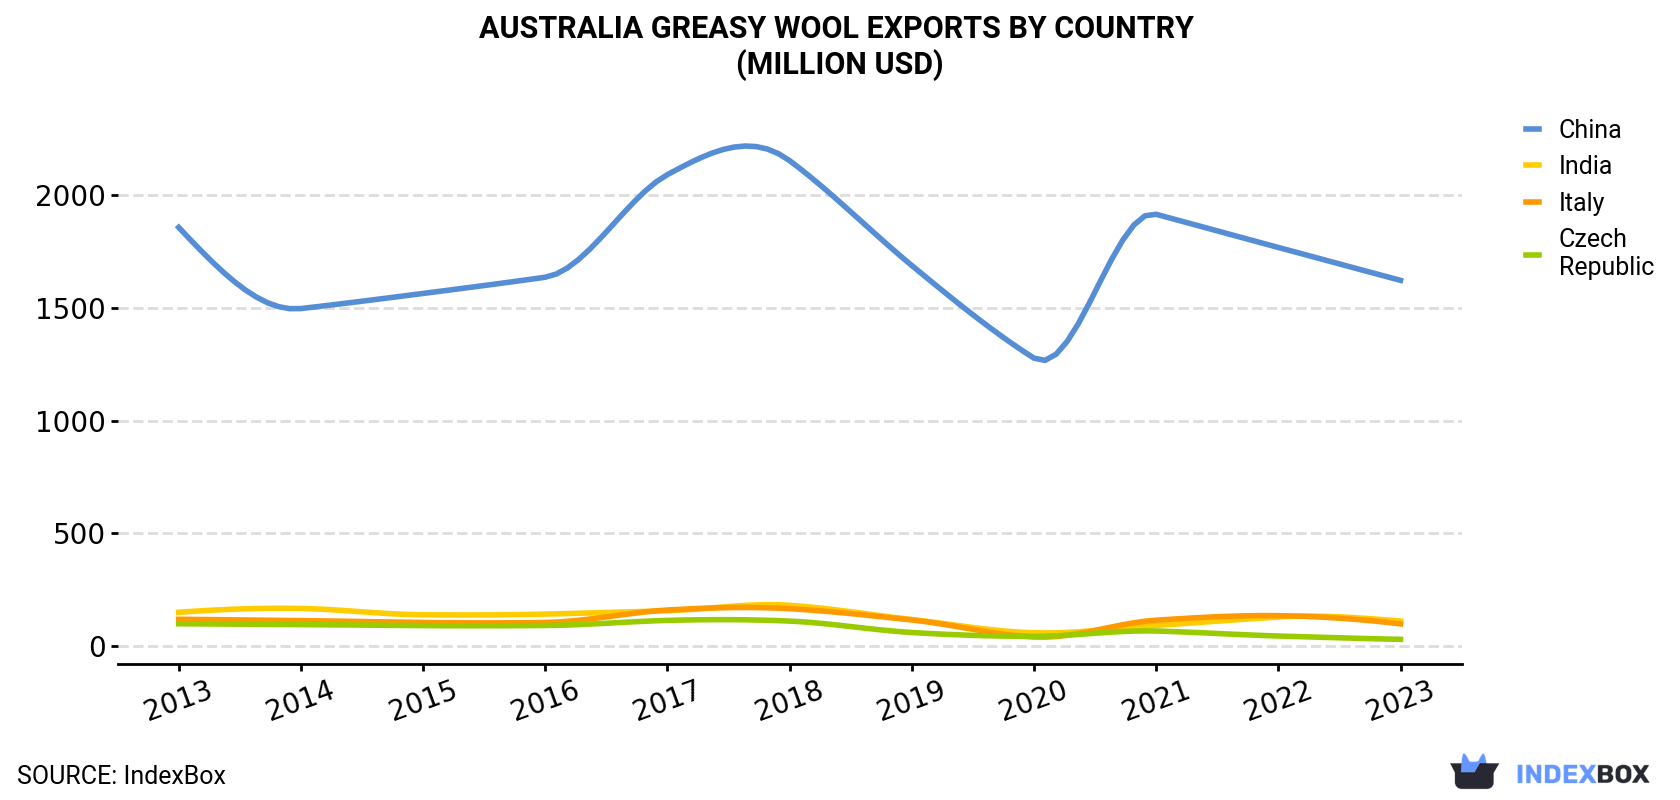 Australia Greasy Wool Exports By Country (Million USD)